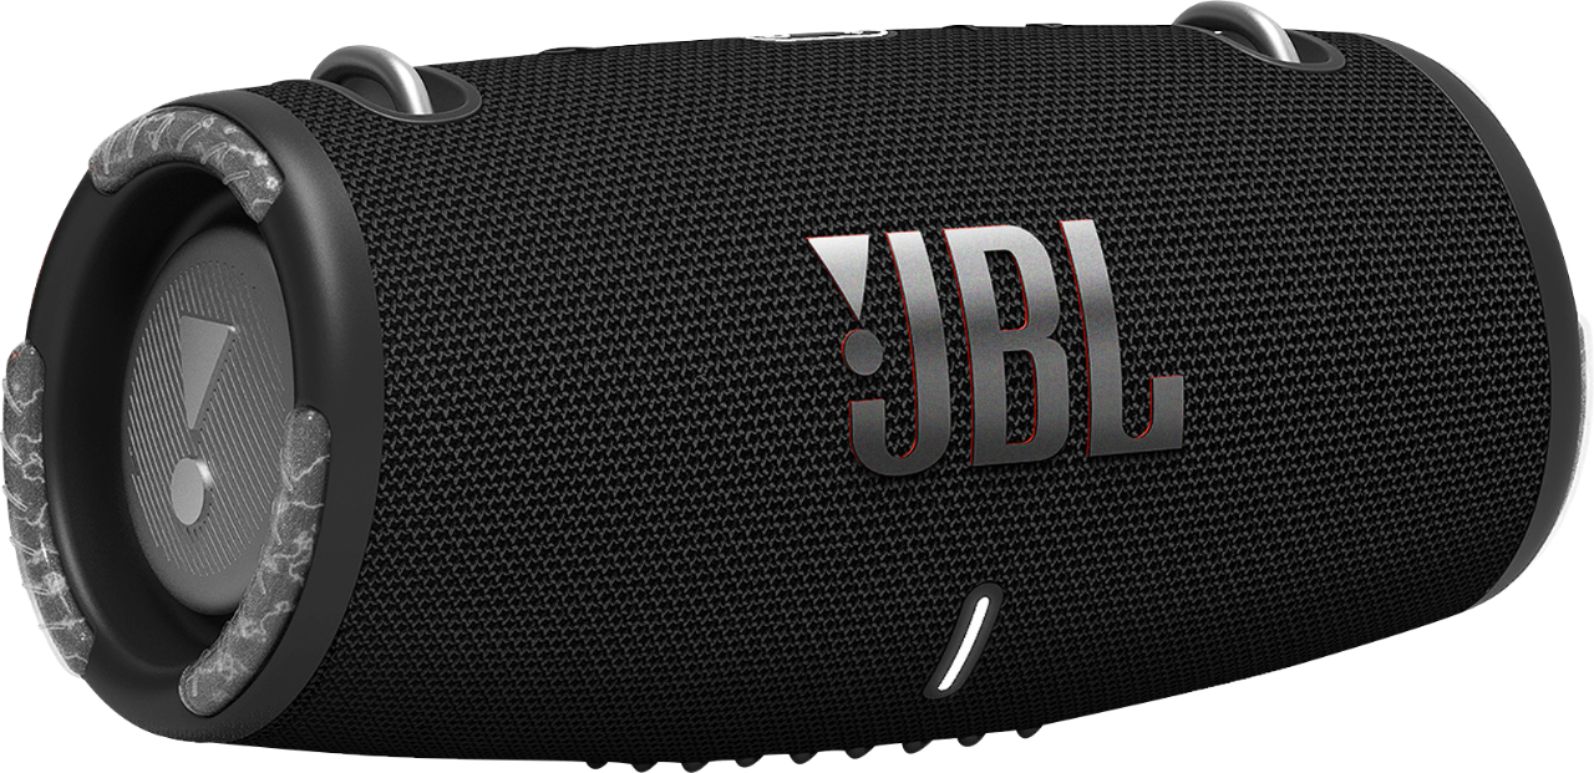 JBL Xtreme 2 Bluetooth Speaker Specifications